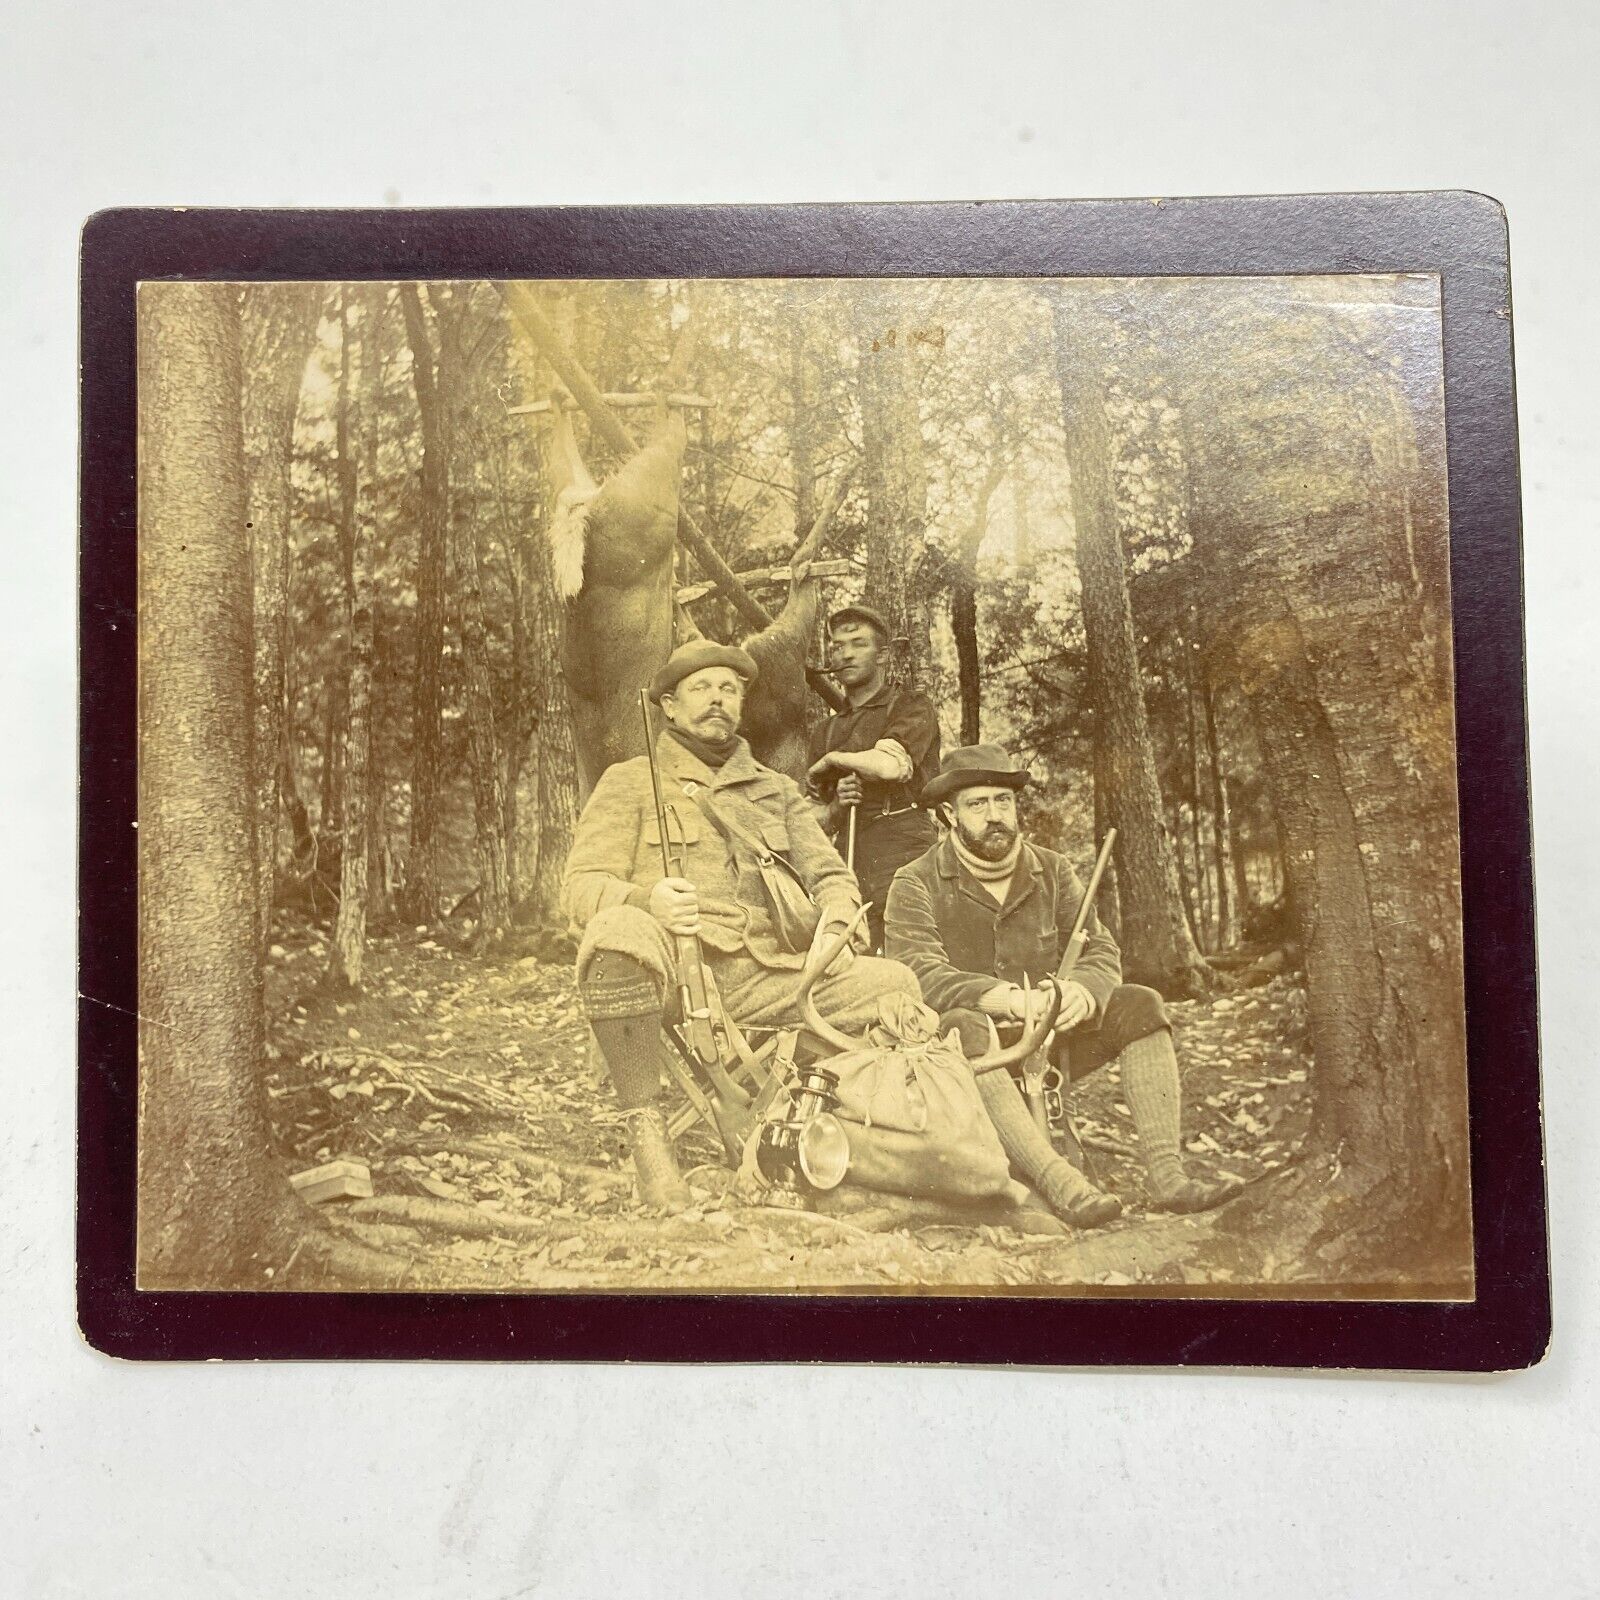 Hunters in woods with dead deer guns smoking pipes amazing cabinet card c1890s